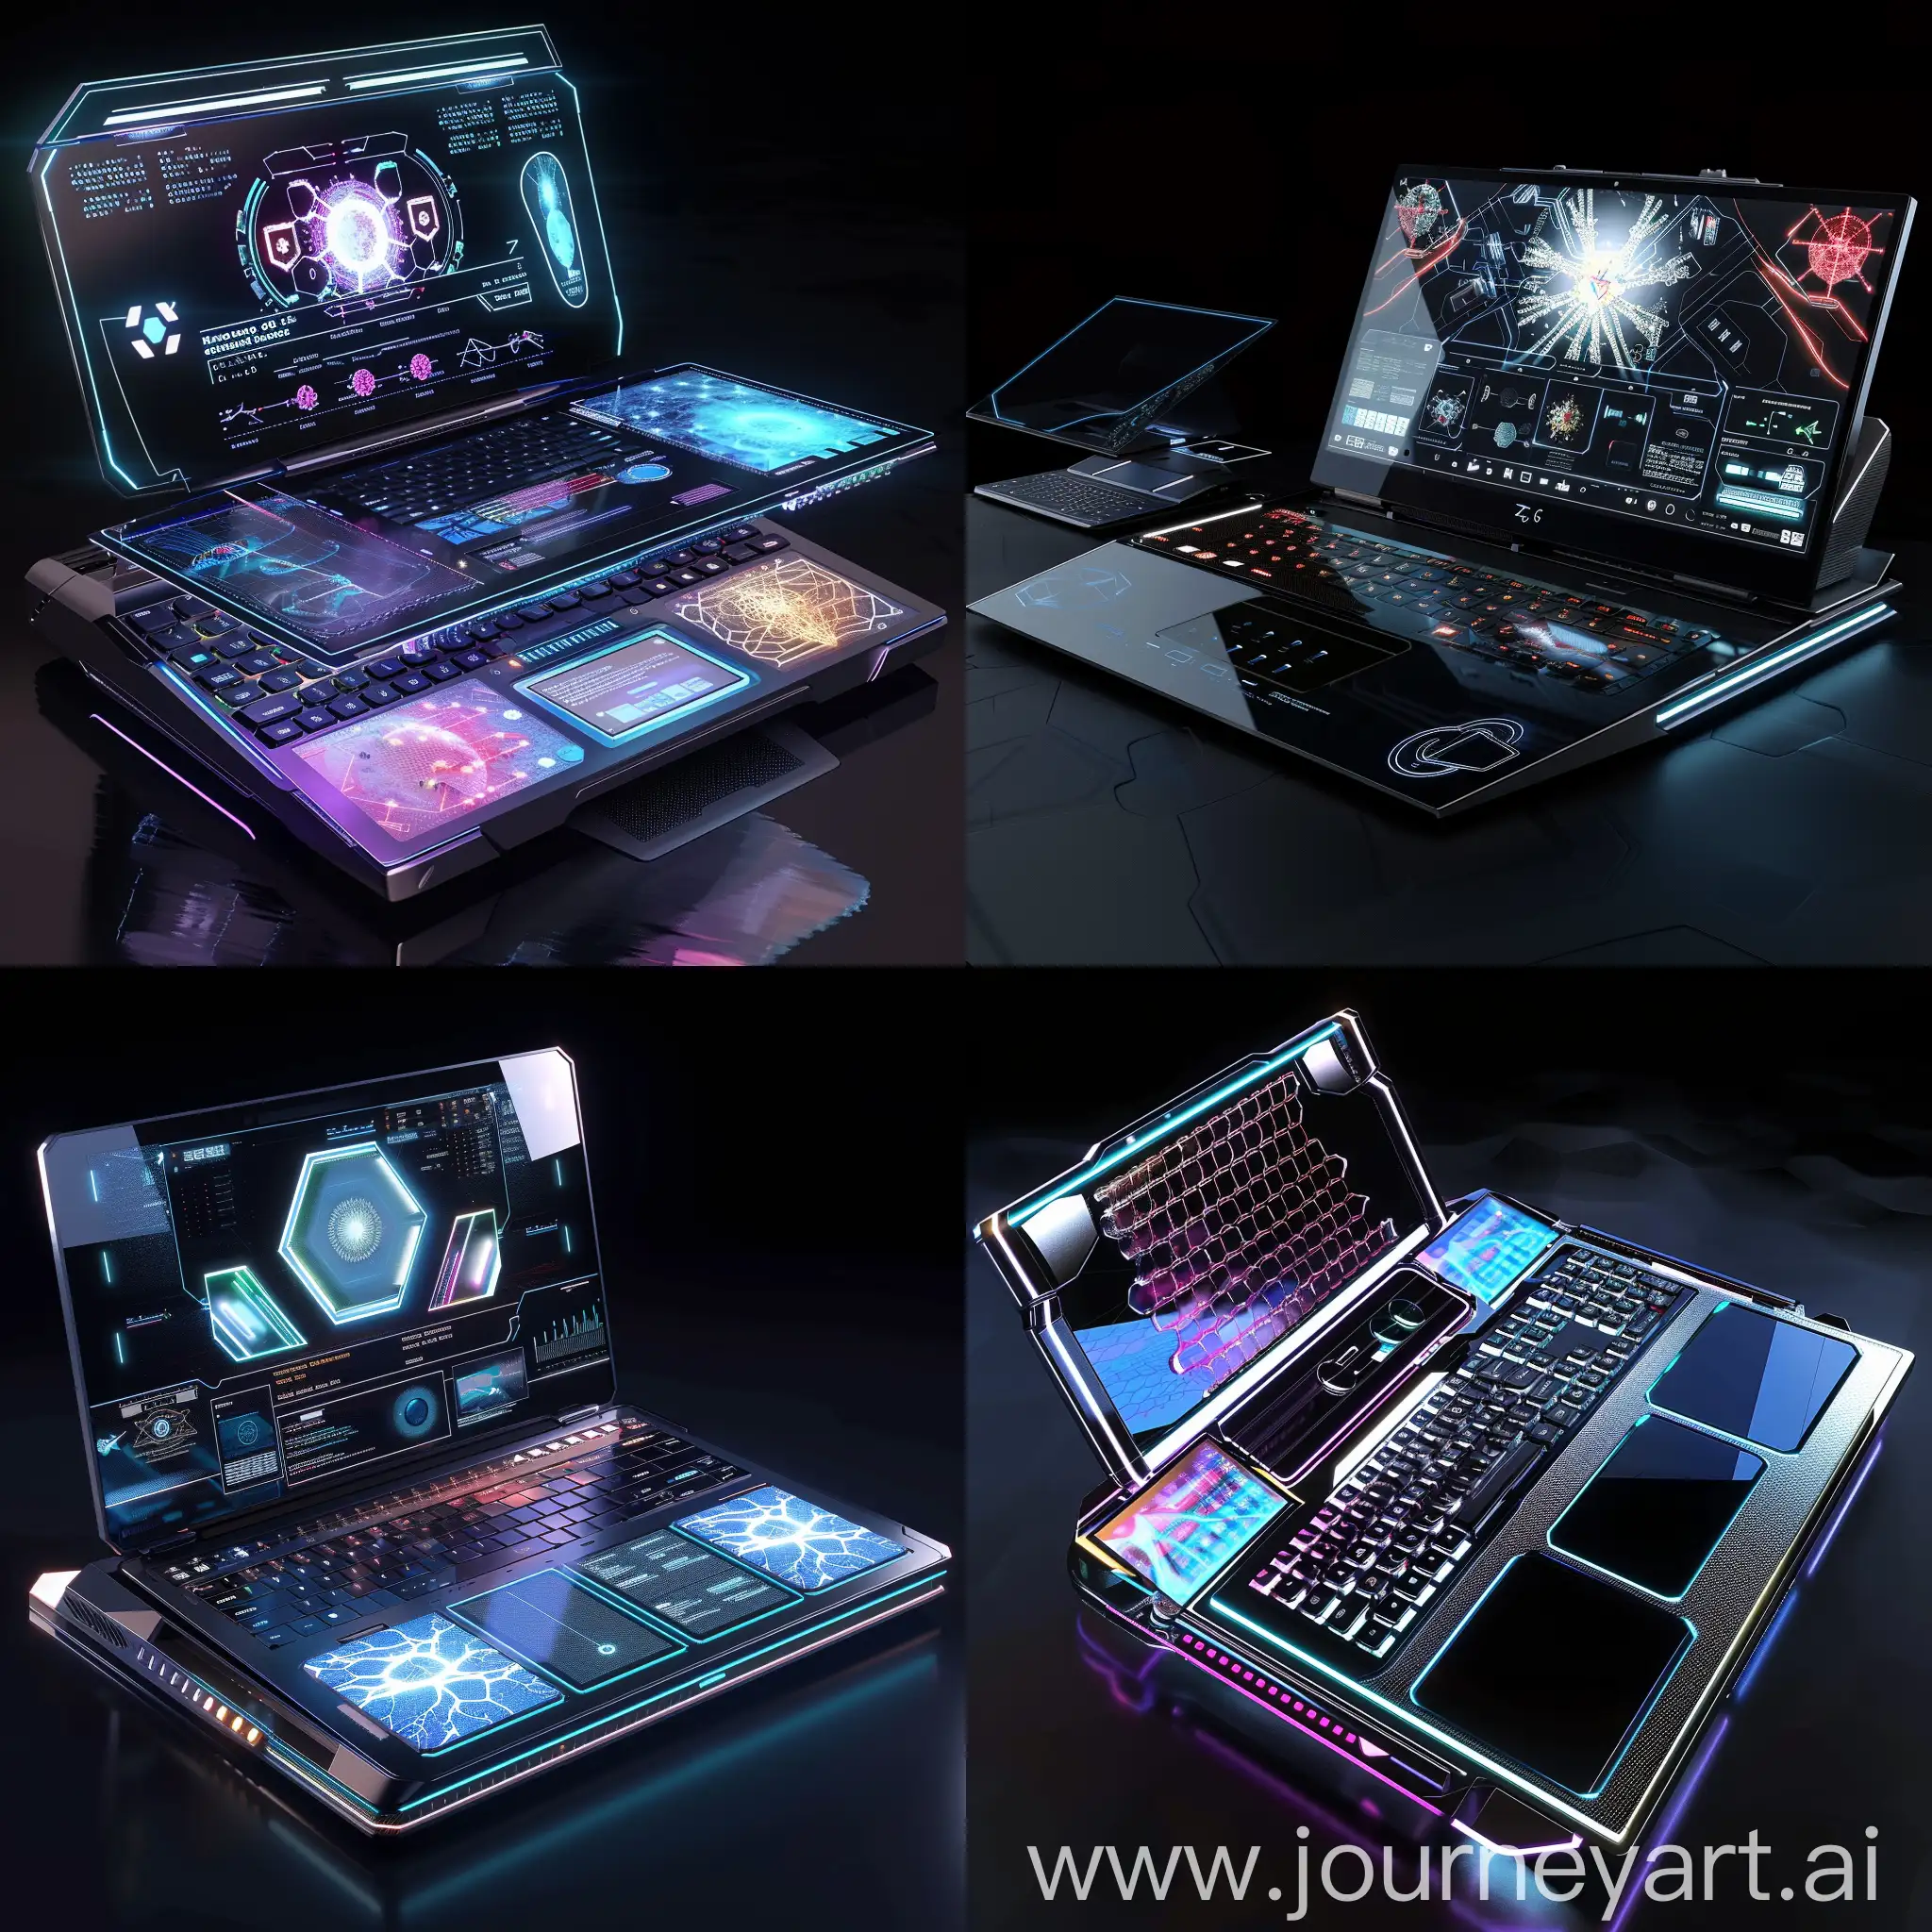 Futuristic-Quantum-Computing-Laptop-with-Holographic-Display-and-Biometric-Security